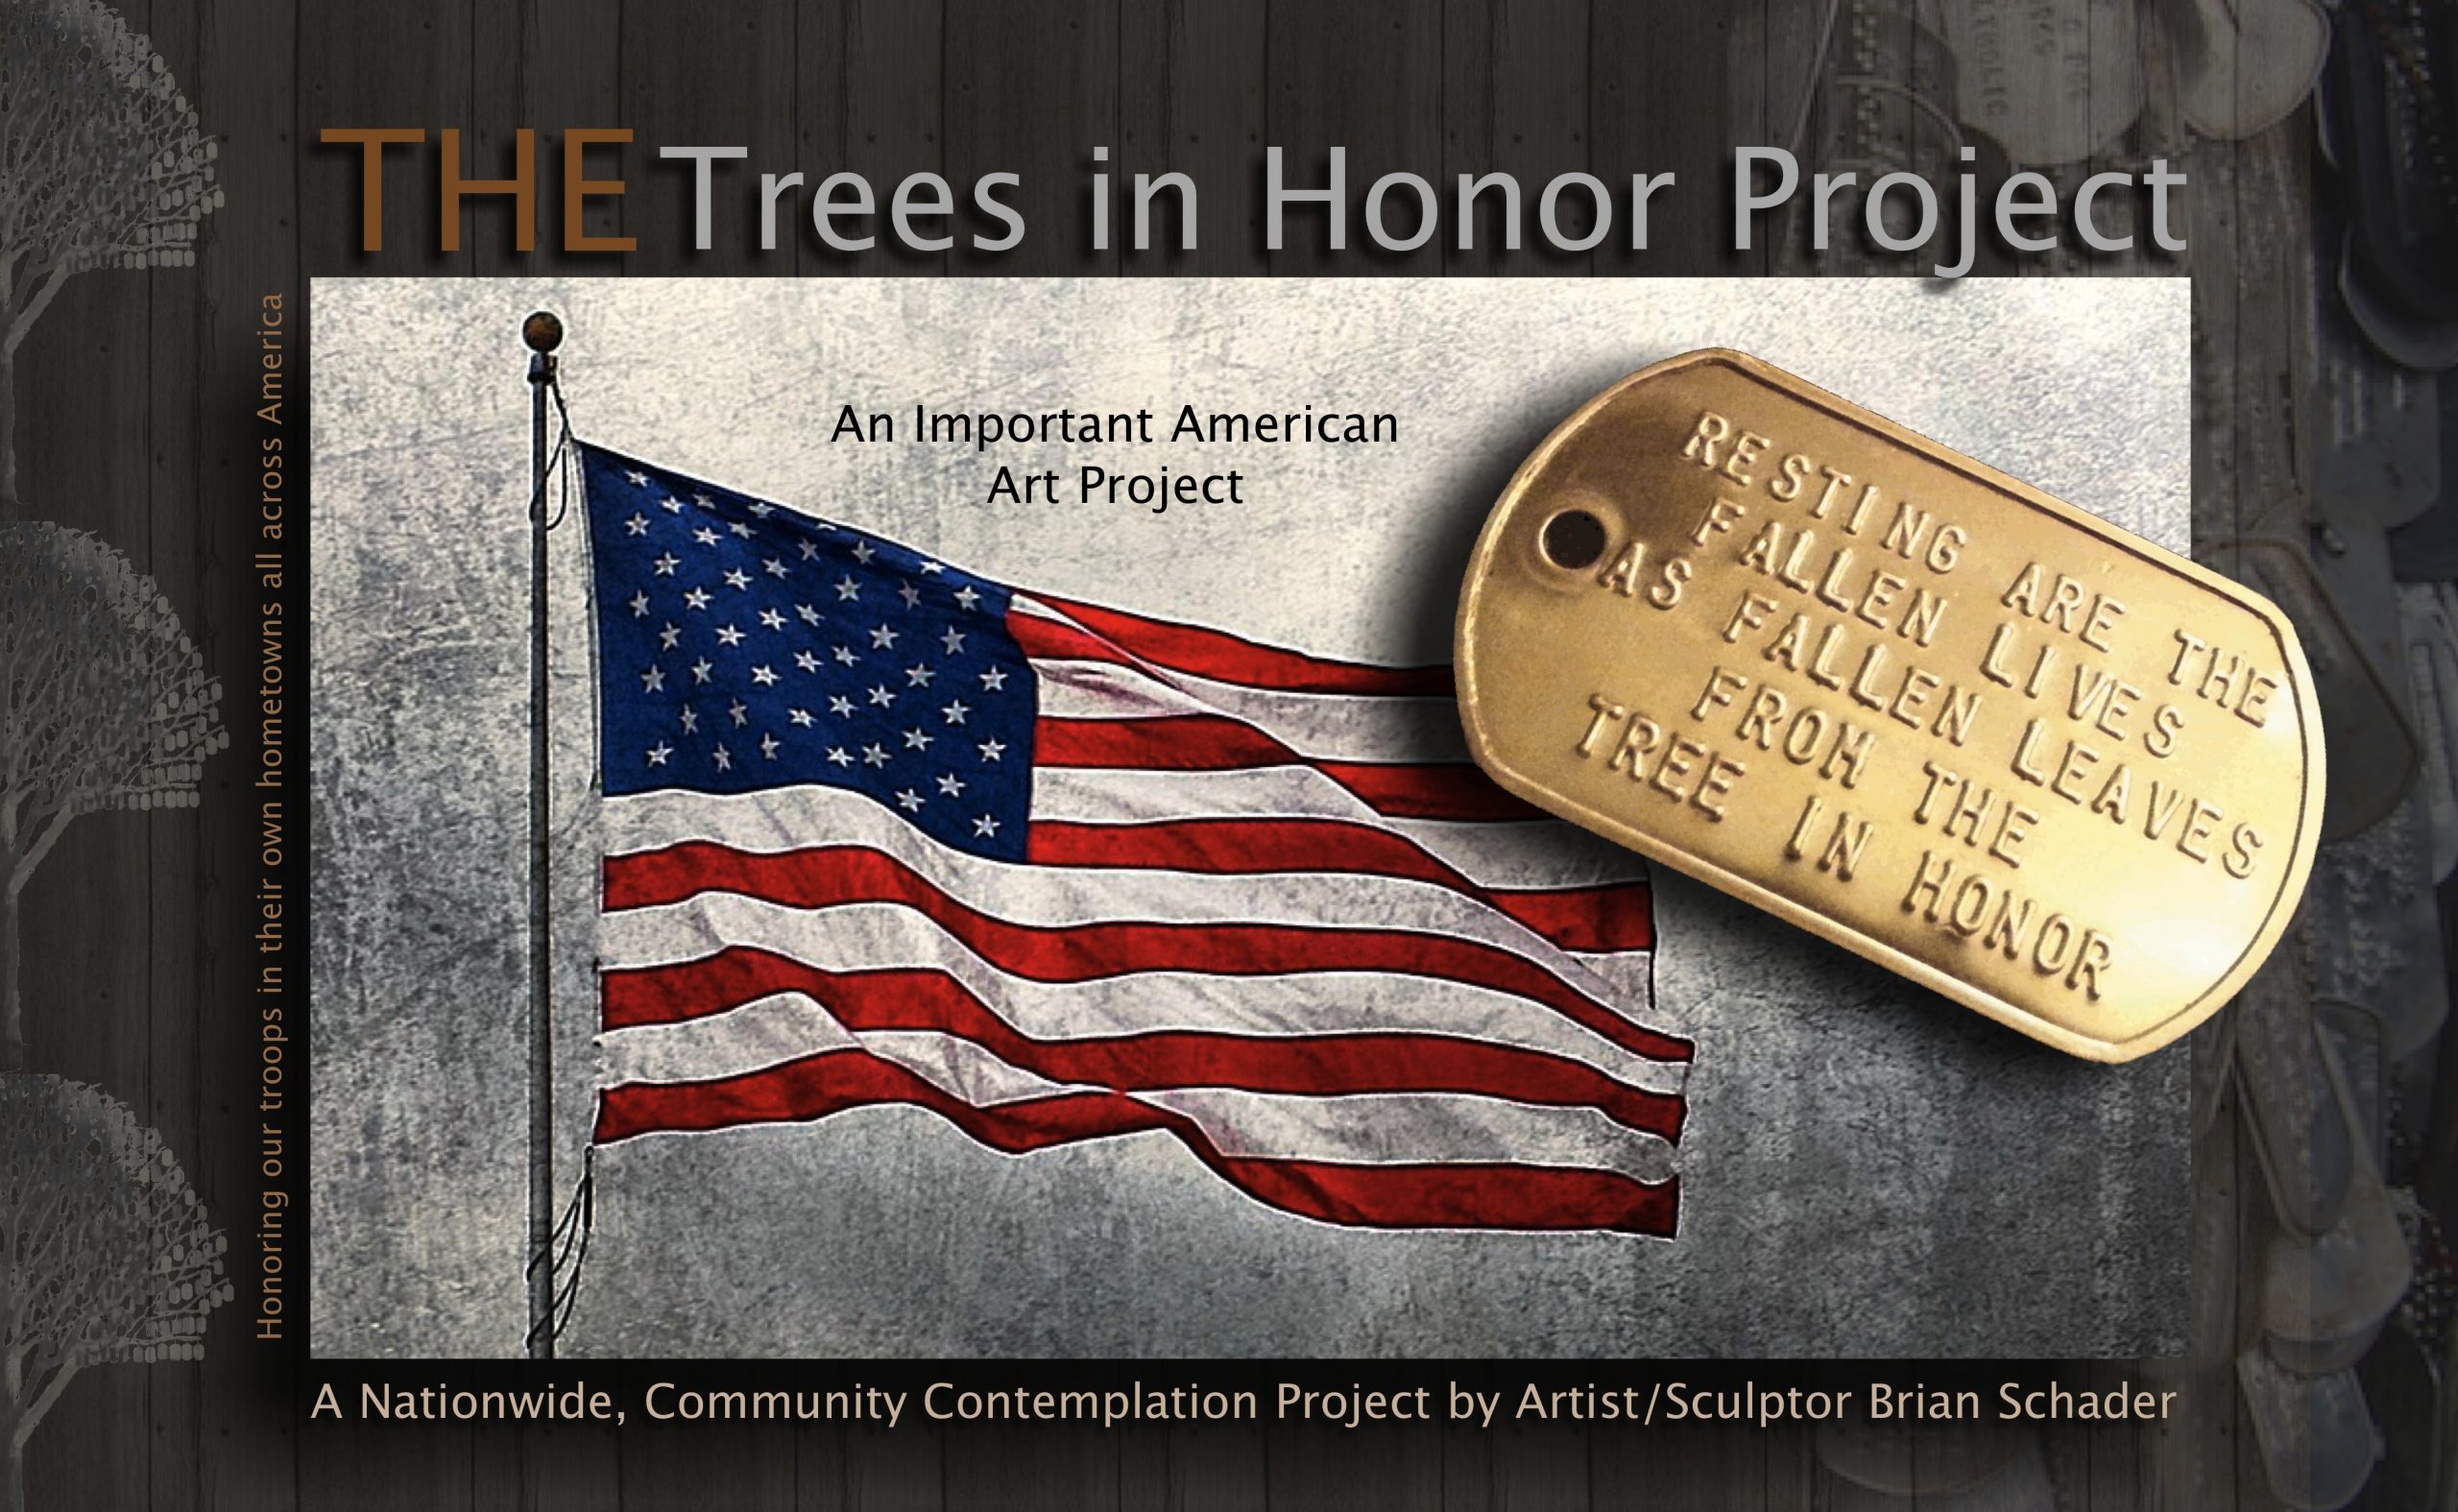 The Trees in Honor Project